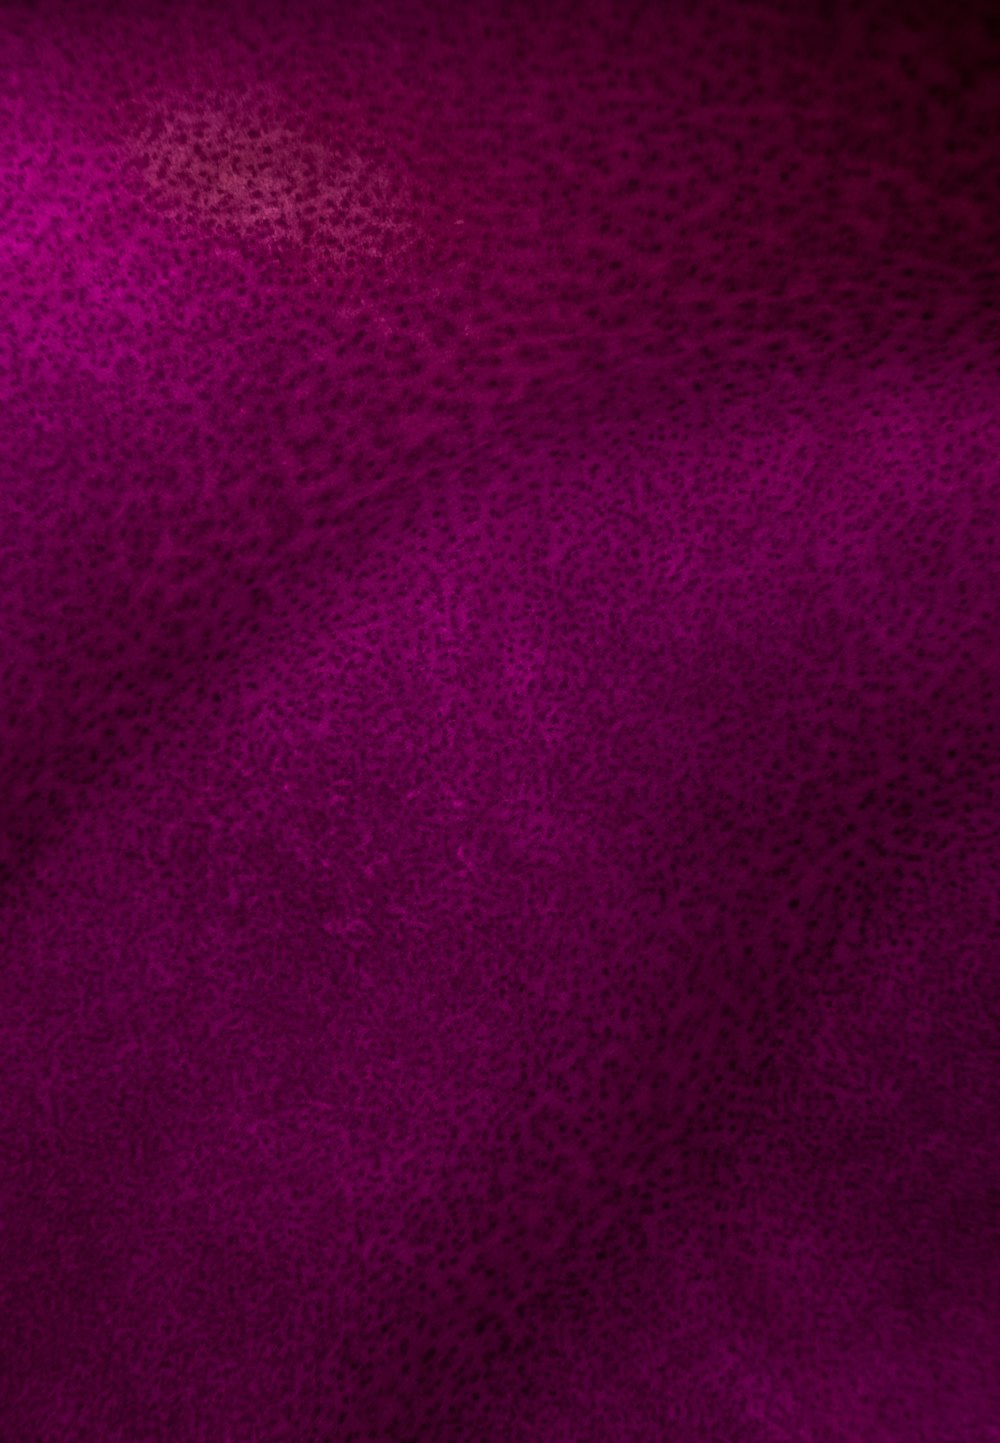 a dark purple background with a pattern of small dots